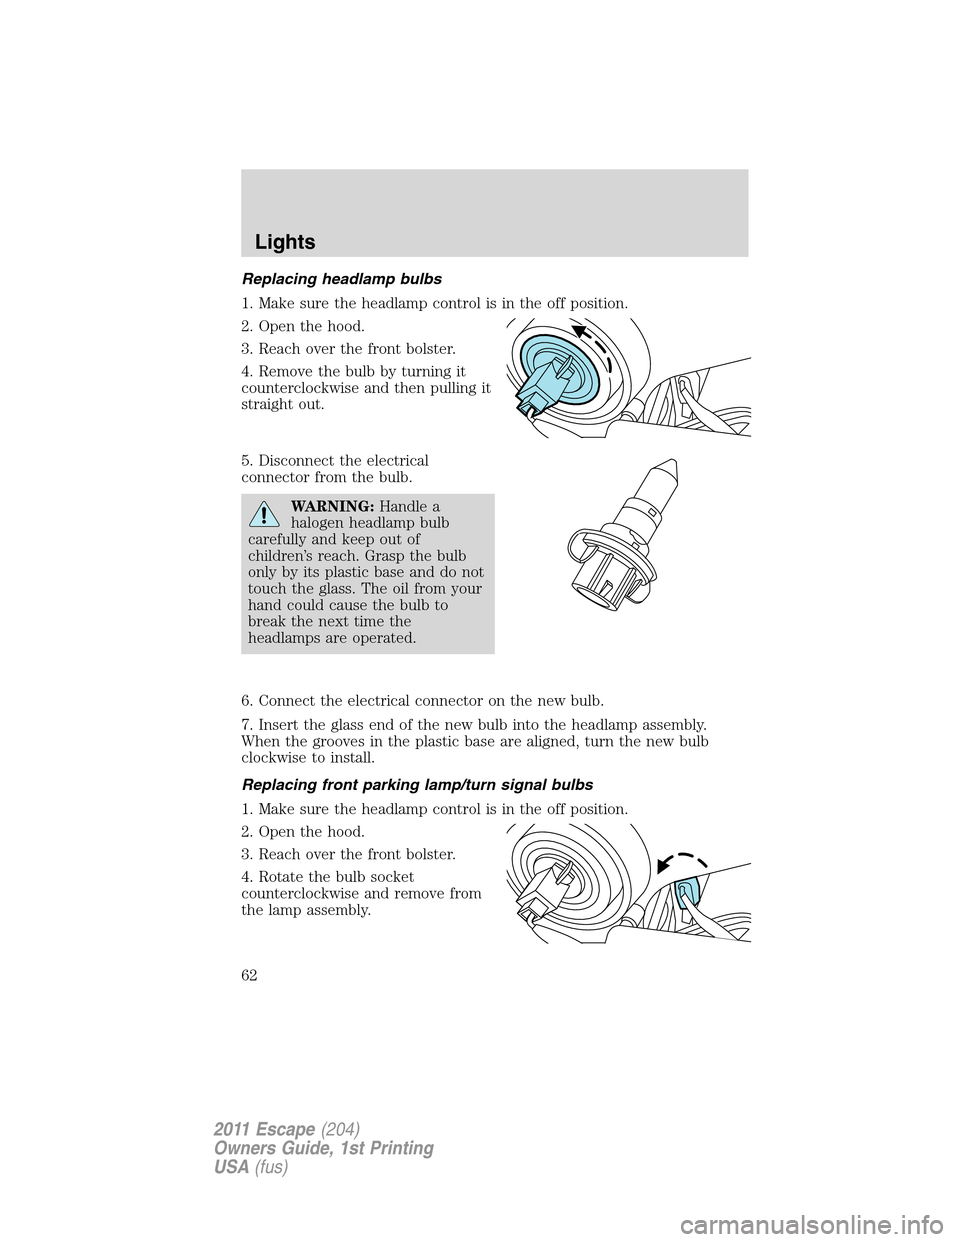 FORD ESCAPE 2011 2.G Owners Manual Replacing headlamp bulbs
1. Make sure the headlamp control is in the off position.
2. Open the hood.
3. Reach over the front bolster.
4. Remove the bulb by turning it
counterclockwise and then pulling